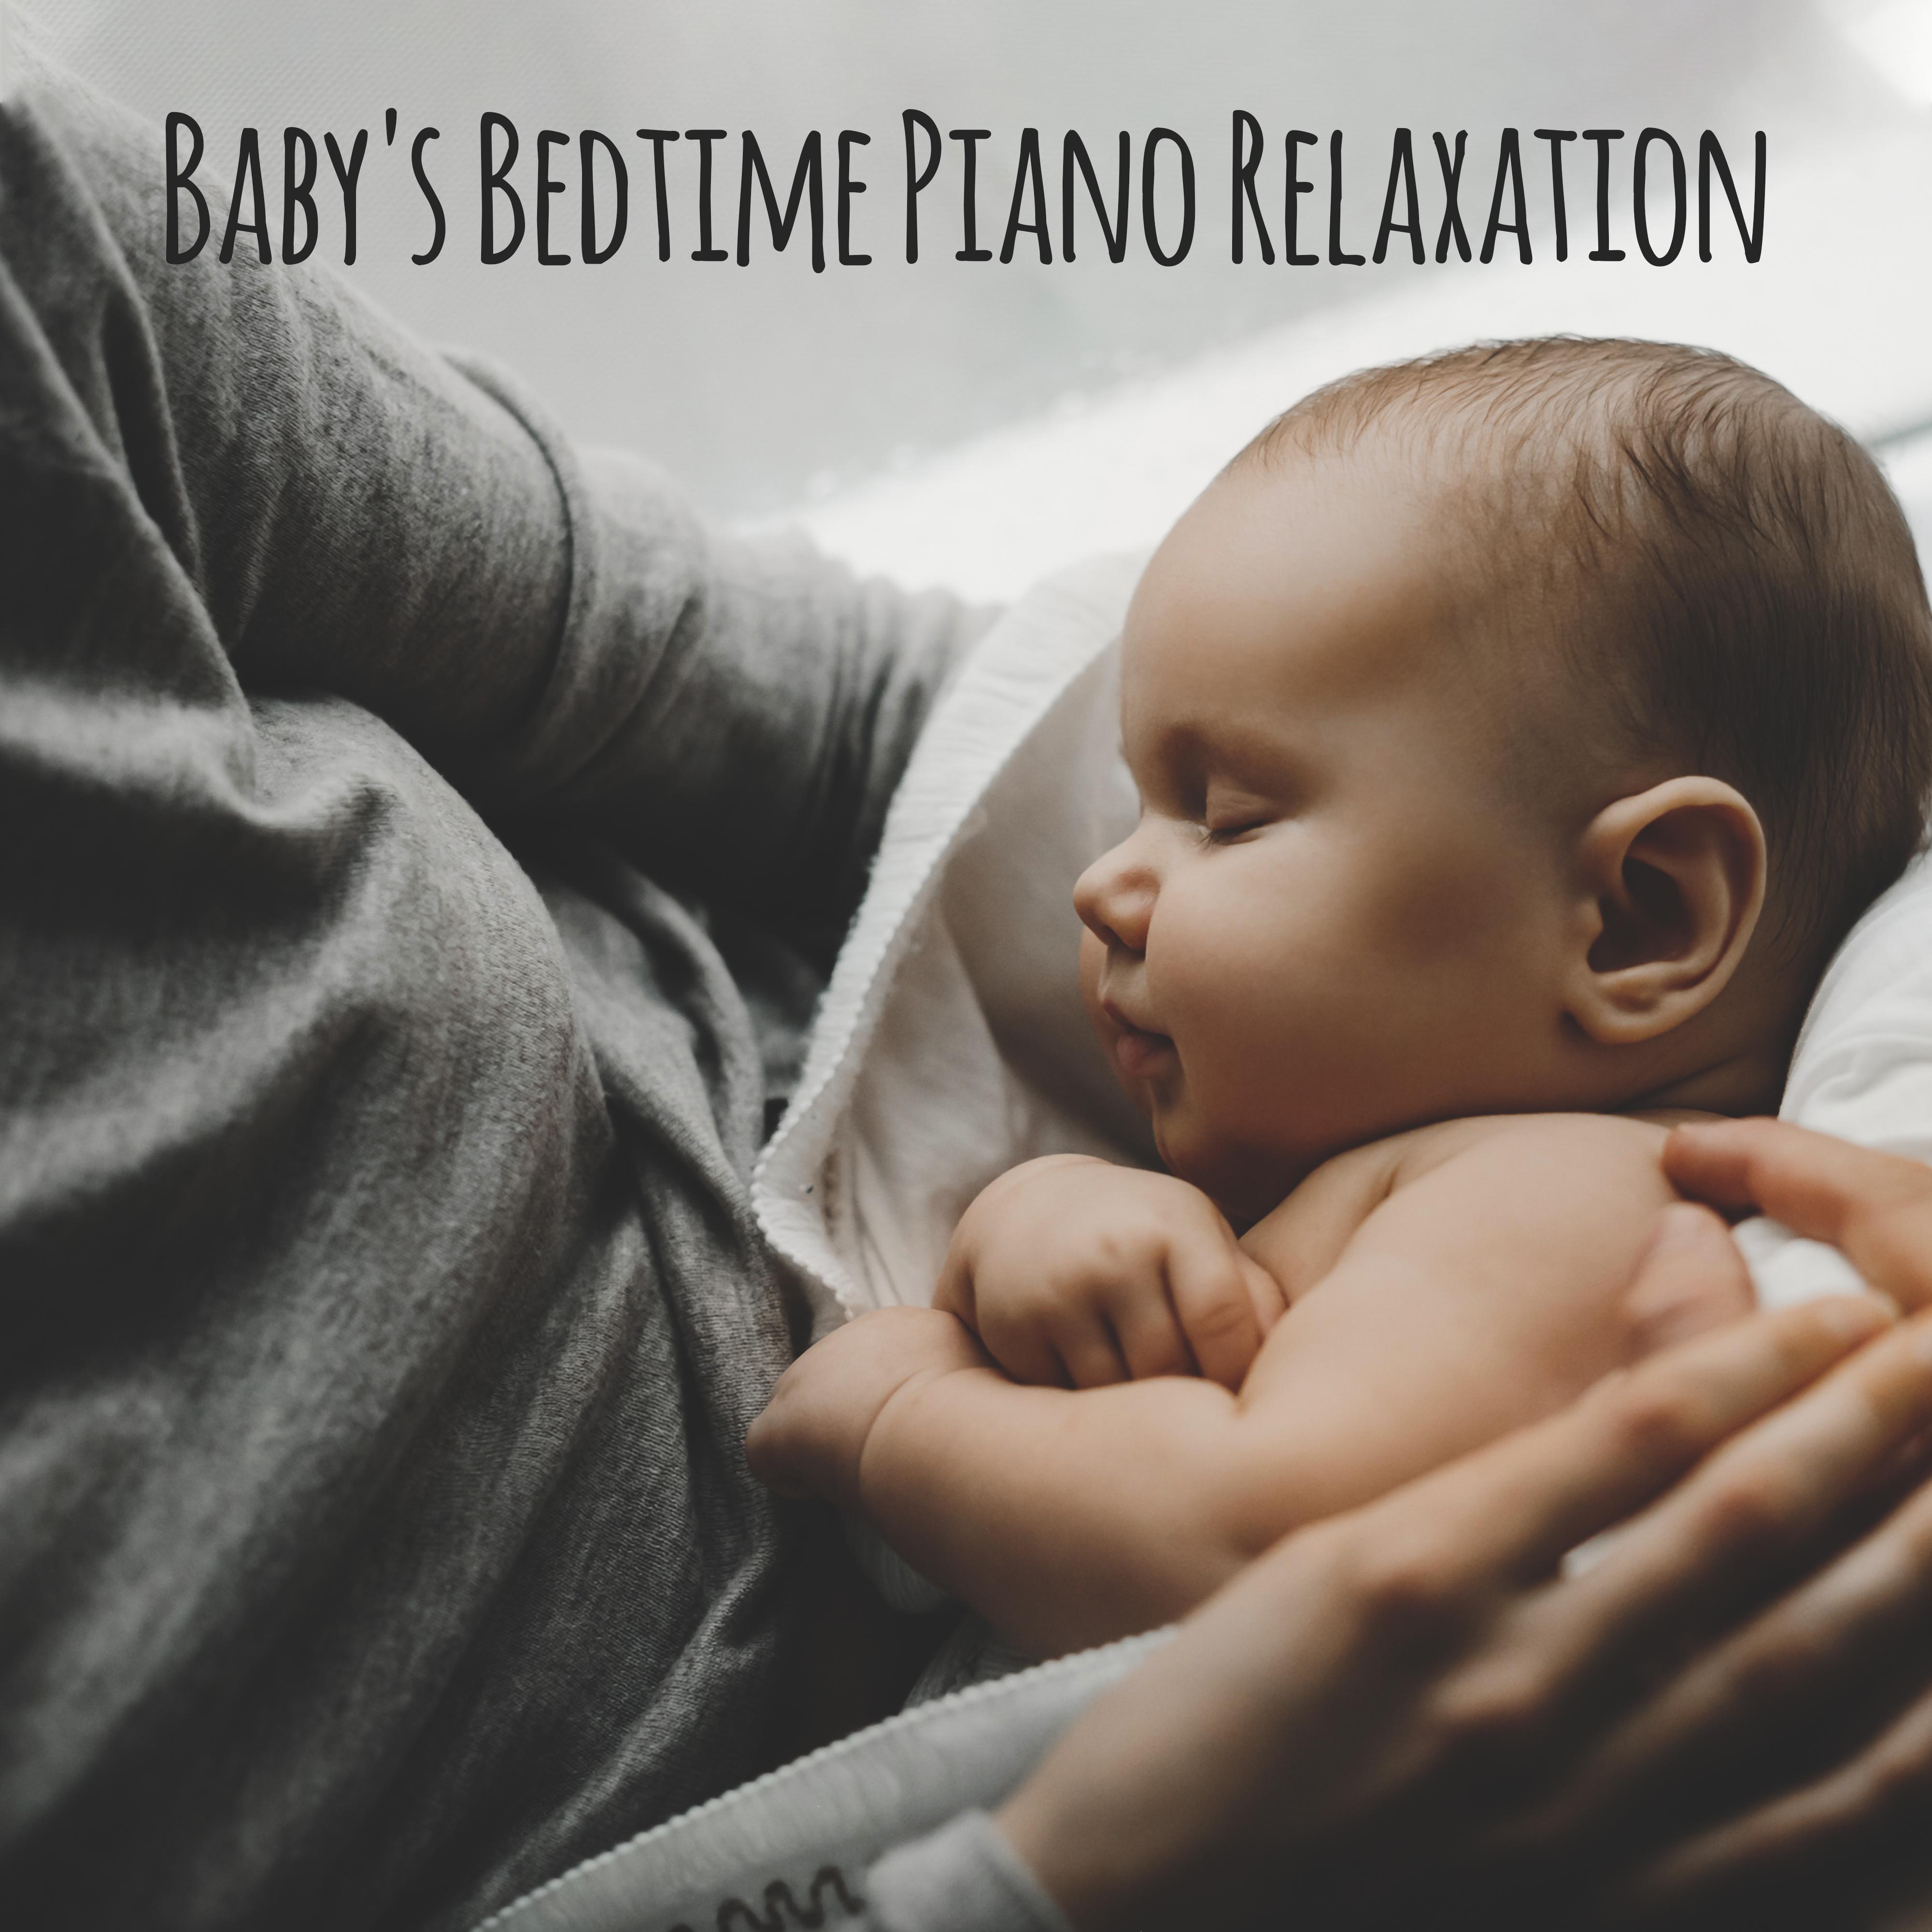 Baby's Bedtime Piano Relaxation: Instrumental Piano Jazz Lullabies for Calm Baby Sleep and Mummy Full Relax, Newborn and Parents Nap Time